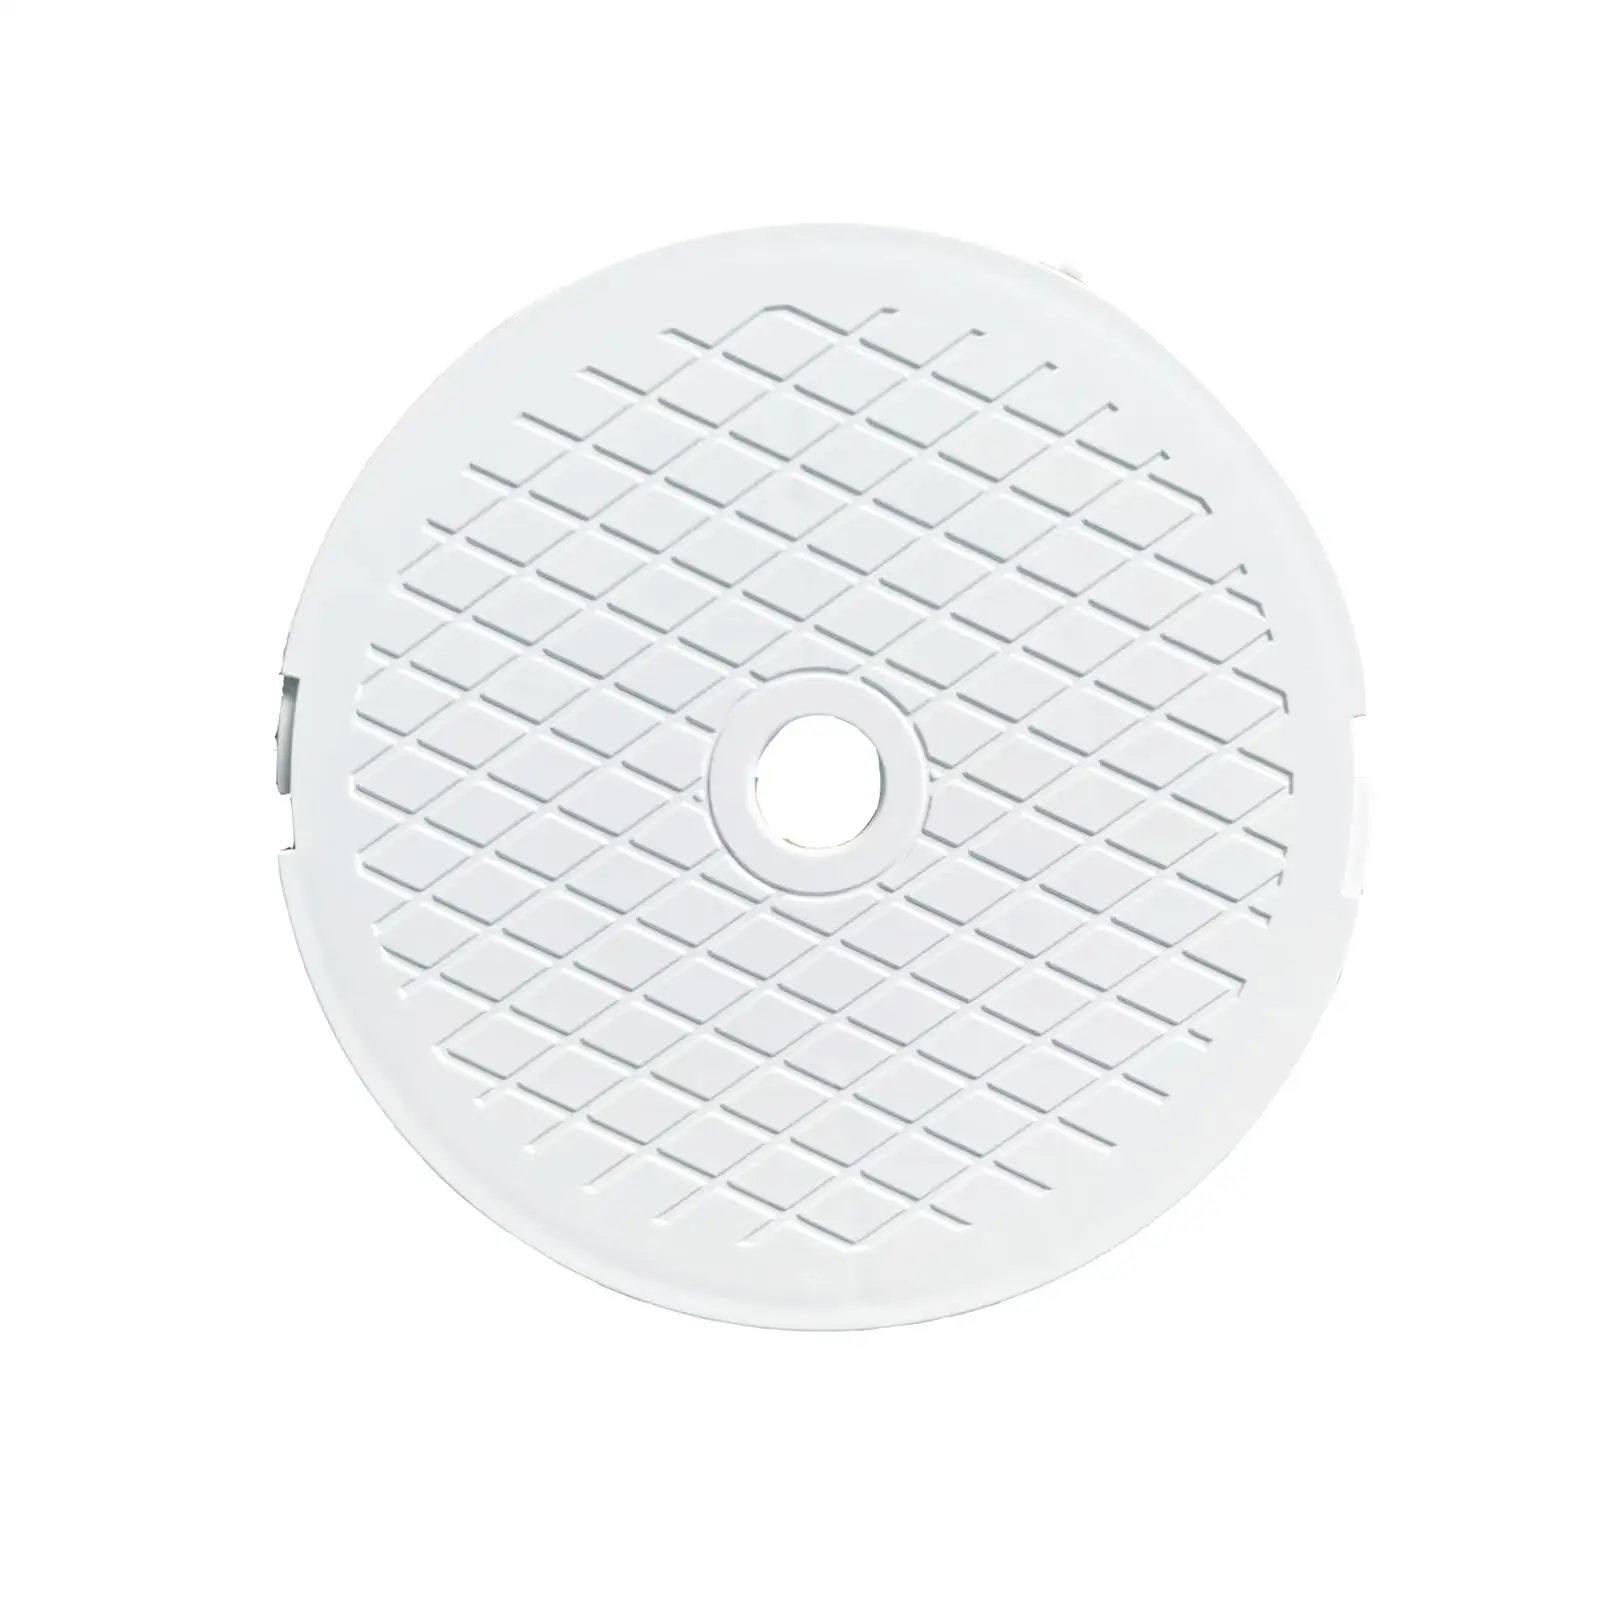 Pool Skimmer Cover Easy Installation Round Replacement Pool Deck Lid Plate for Spx1096 Skimmer above Ground Pool in Ground Pool